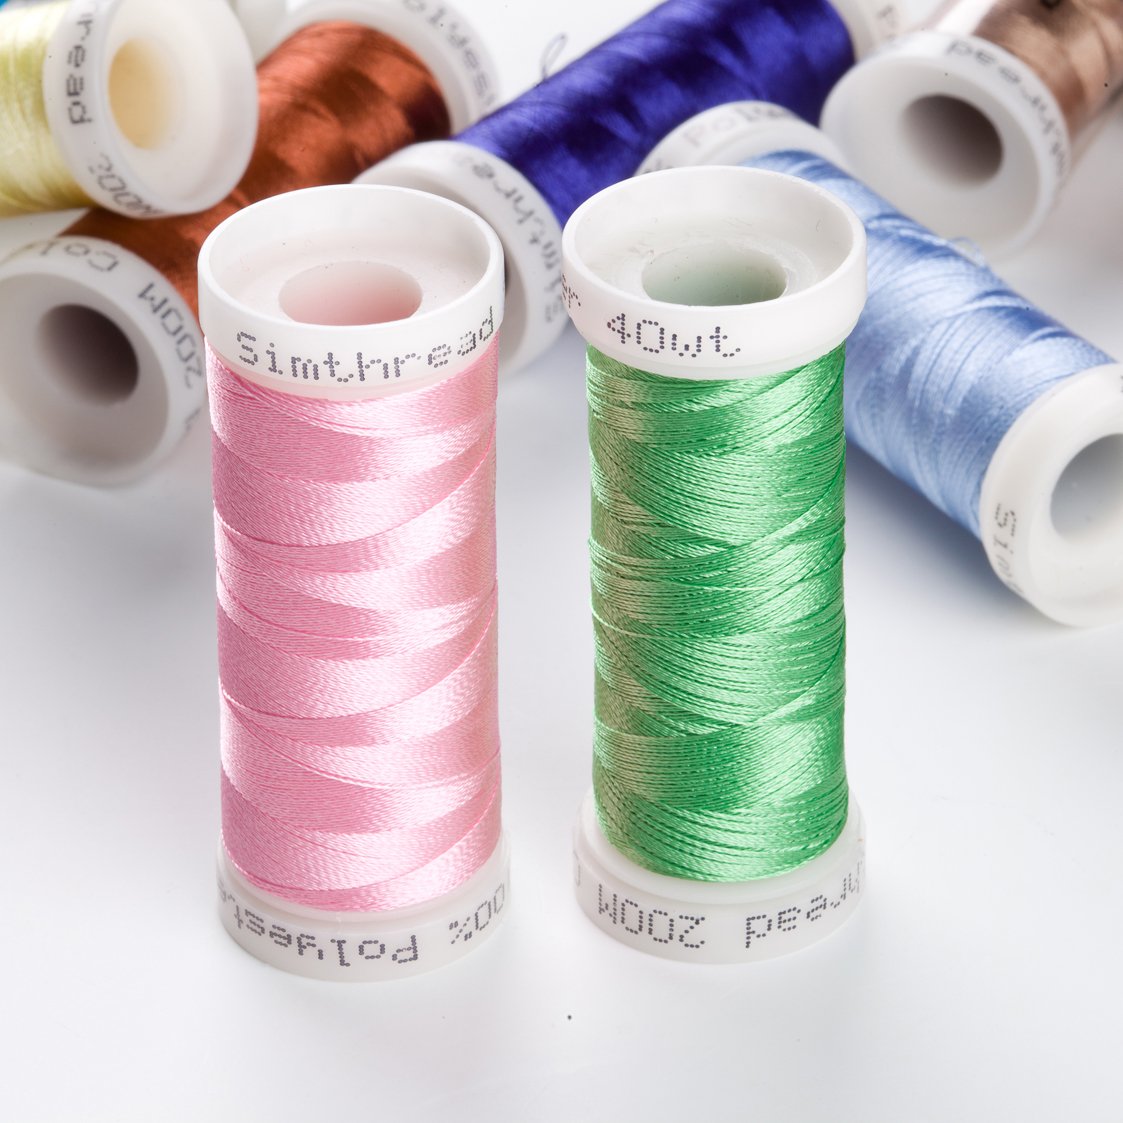 Simthread 63 Brother Spools 330 Yards Polyester Embroidery Machine Thread for Brother Babylock Janome Singer Pfaff Husqvarna Bernina Machines